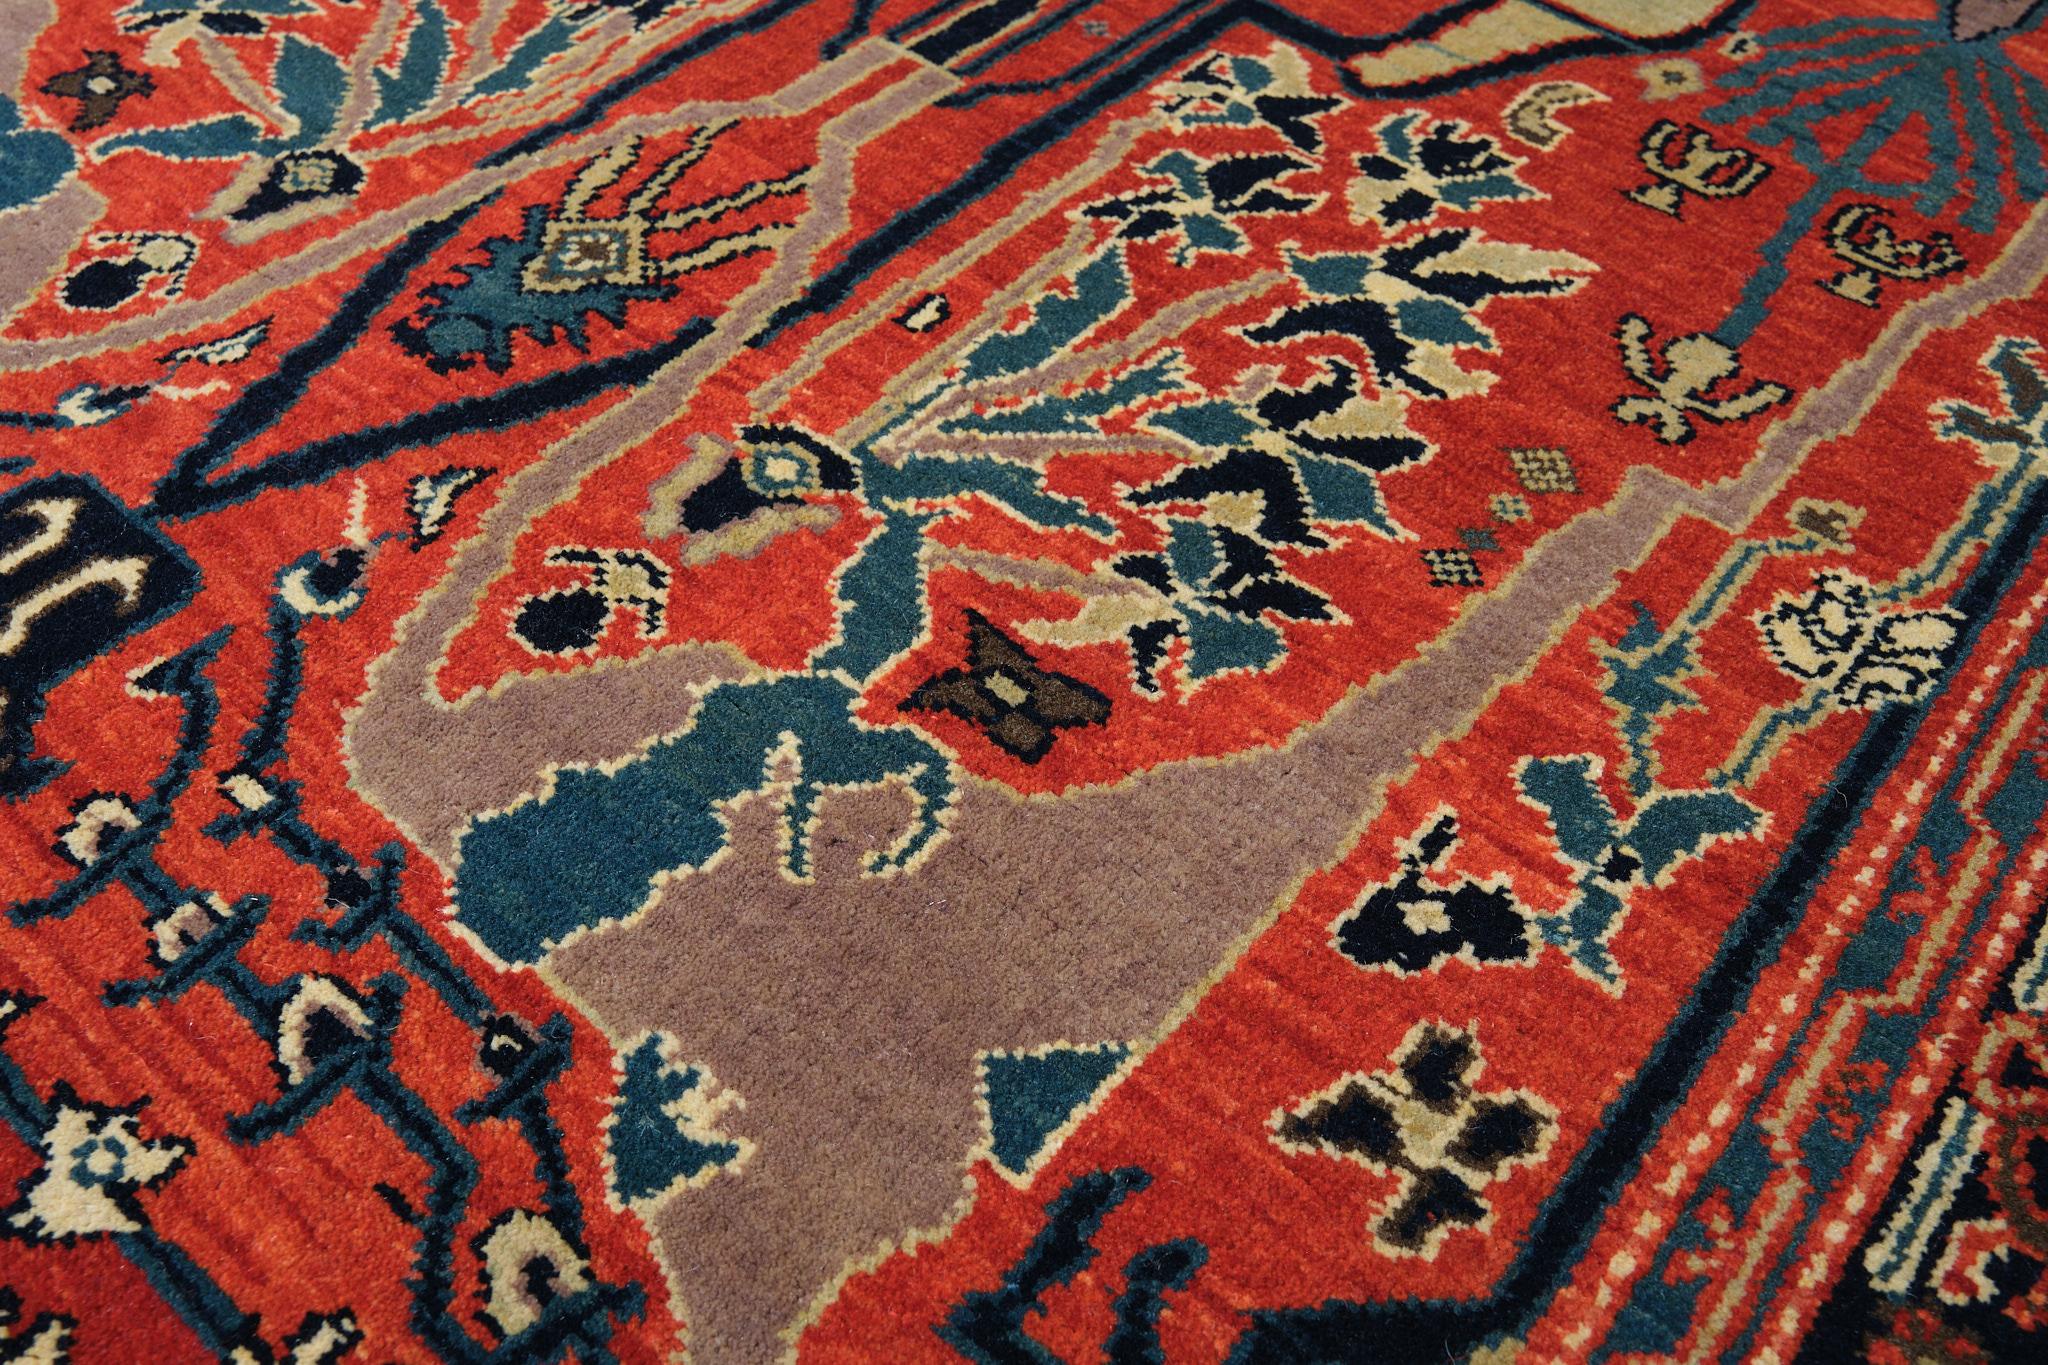 Contemporary Ararat Rugs Gerous Arabesque Rug, 19th C. Persian Revival Carpet Natural Dyed For Sale